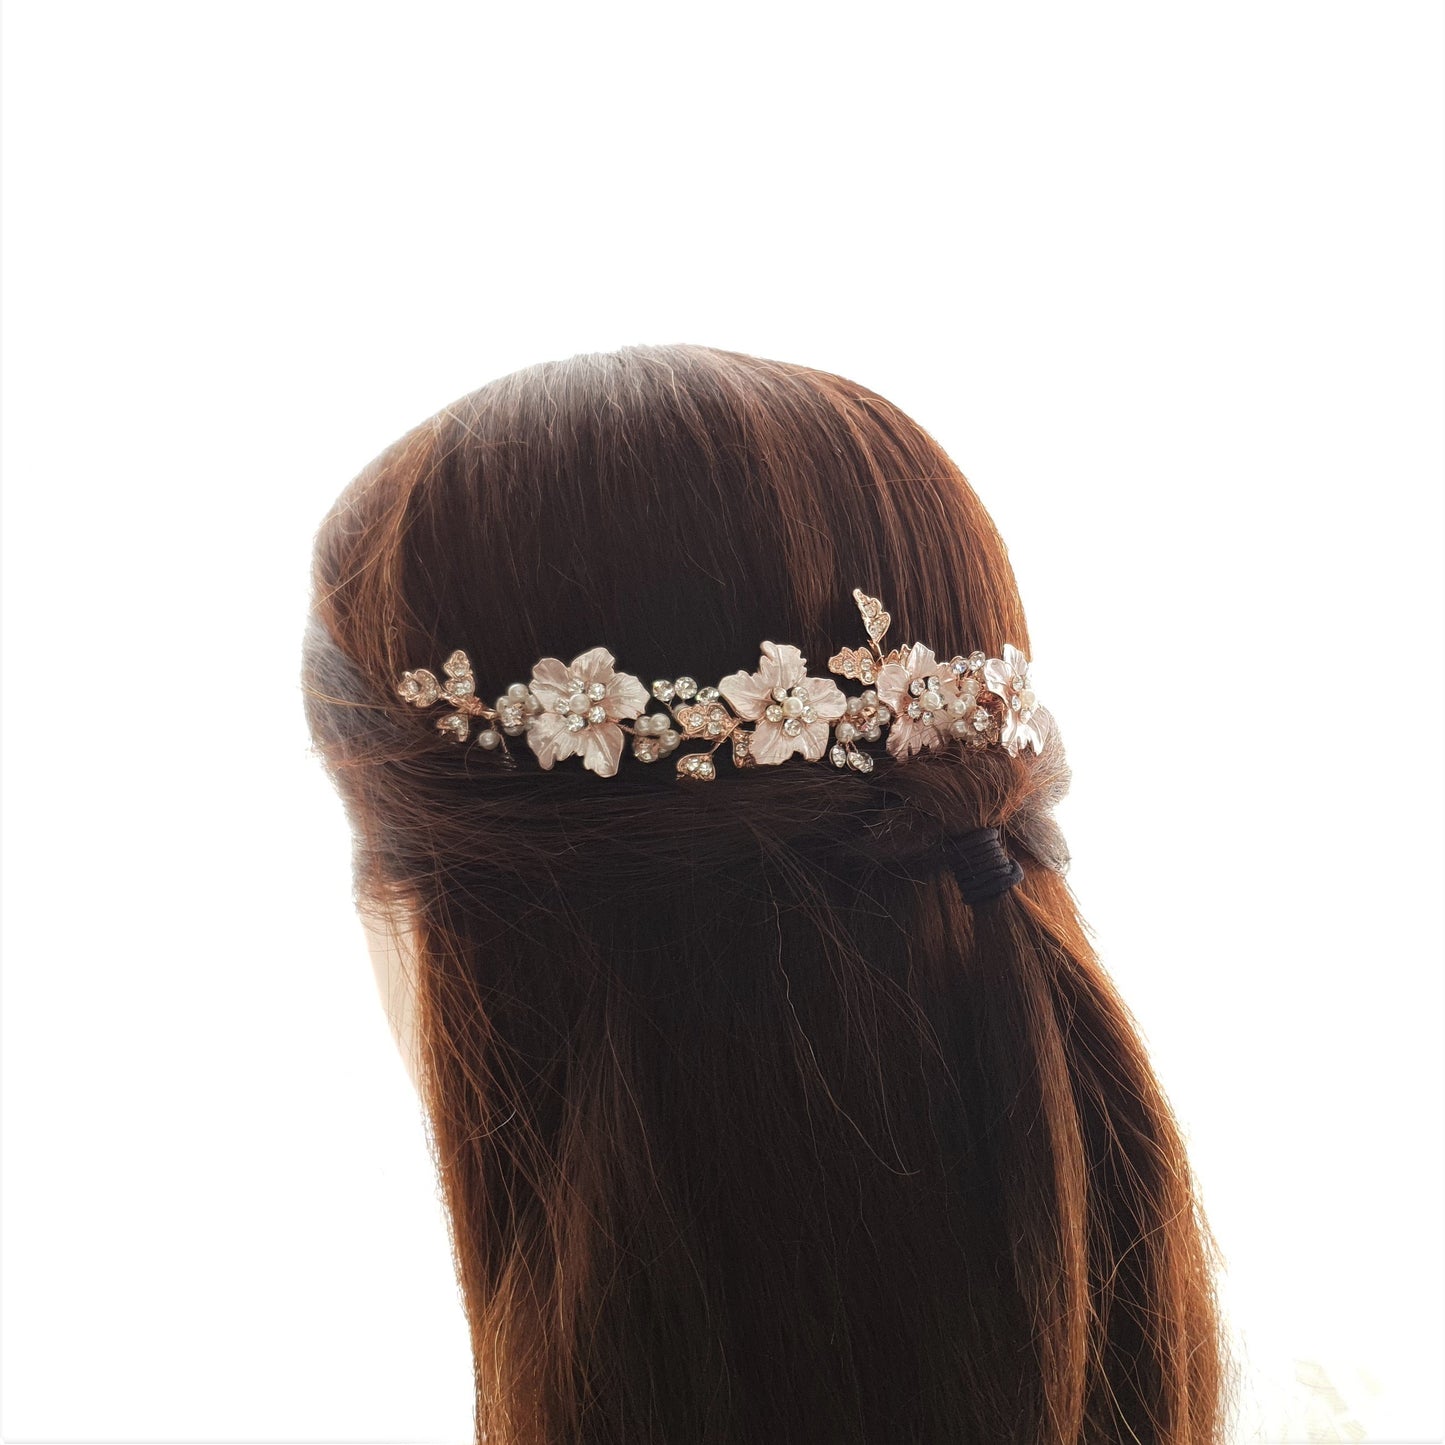 Gold Hair Comb for Weddings With Flowers and Leaves- Gardenia